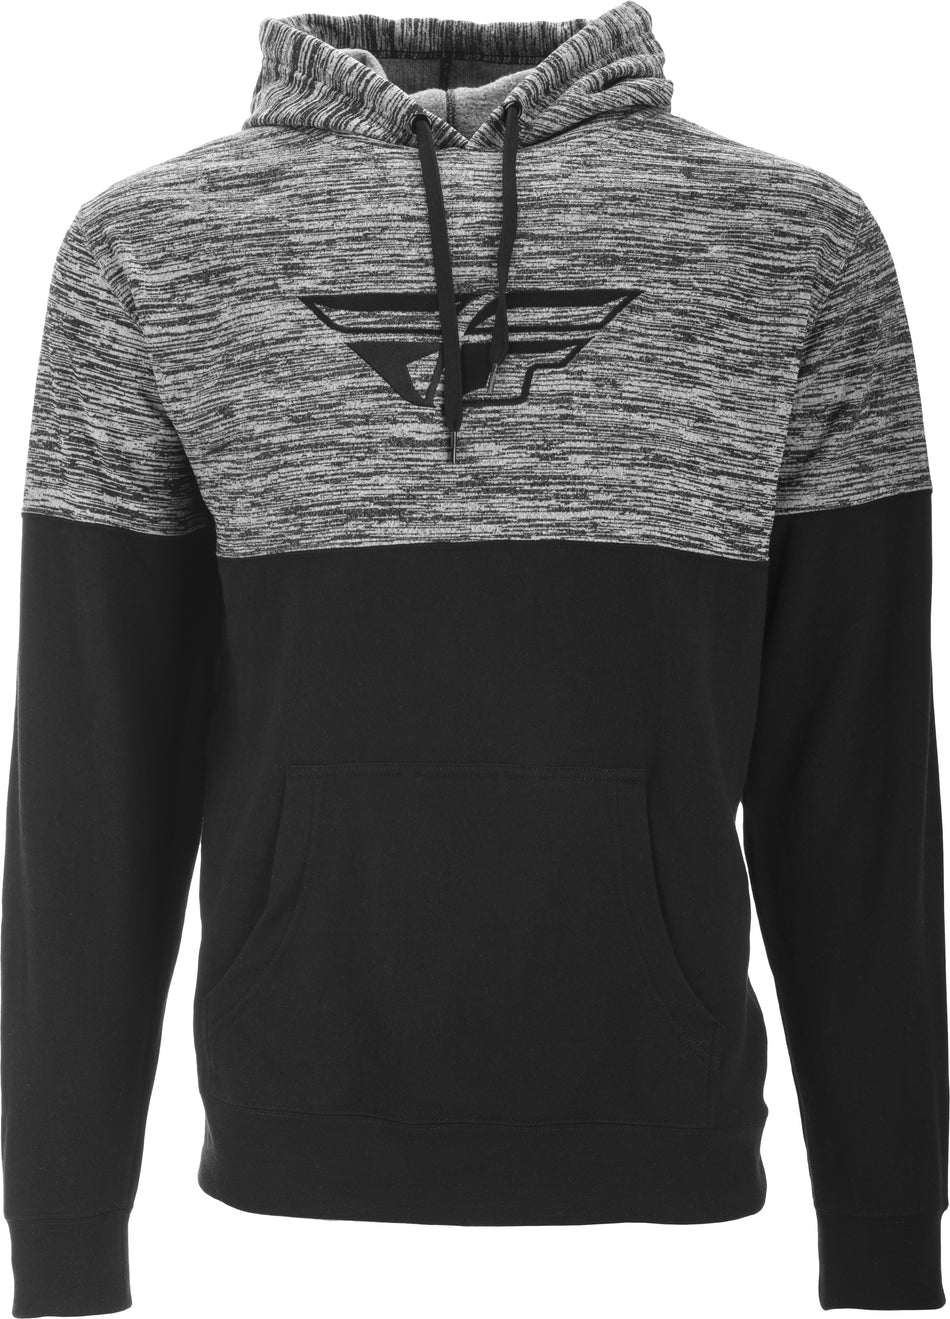 FLY RACING Fly F-Wing Pullover Hoodie Black Noise Sm 354-0228S